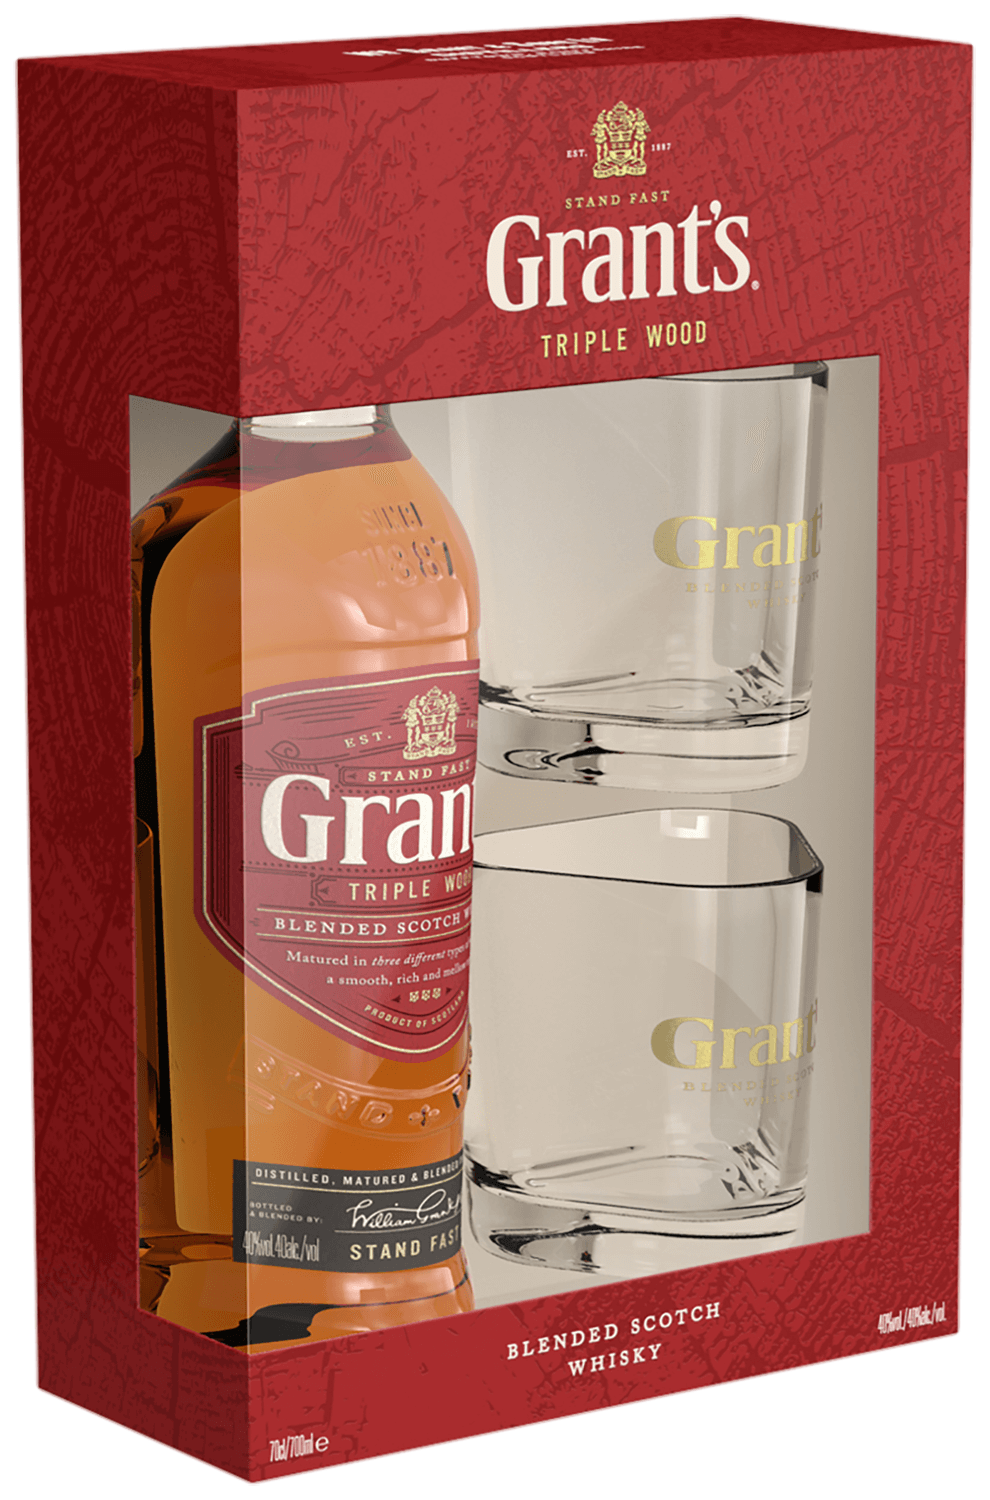 Grant's Triple Wood Blended Scotch Whisky (gift box with 2 glasses) jamie stuart blended scotch whisky 3 y o gift box with 2 glasses